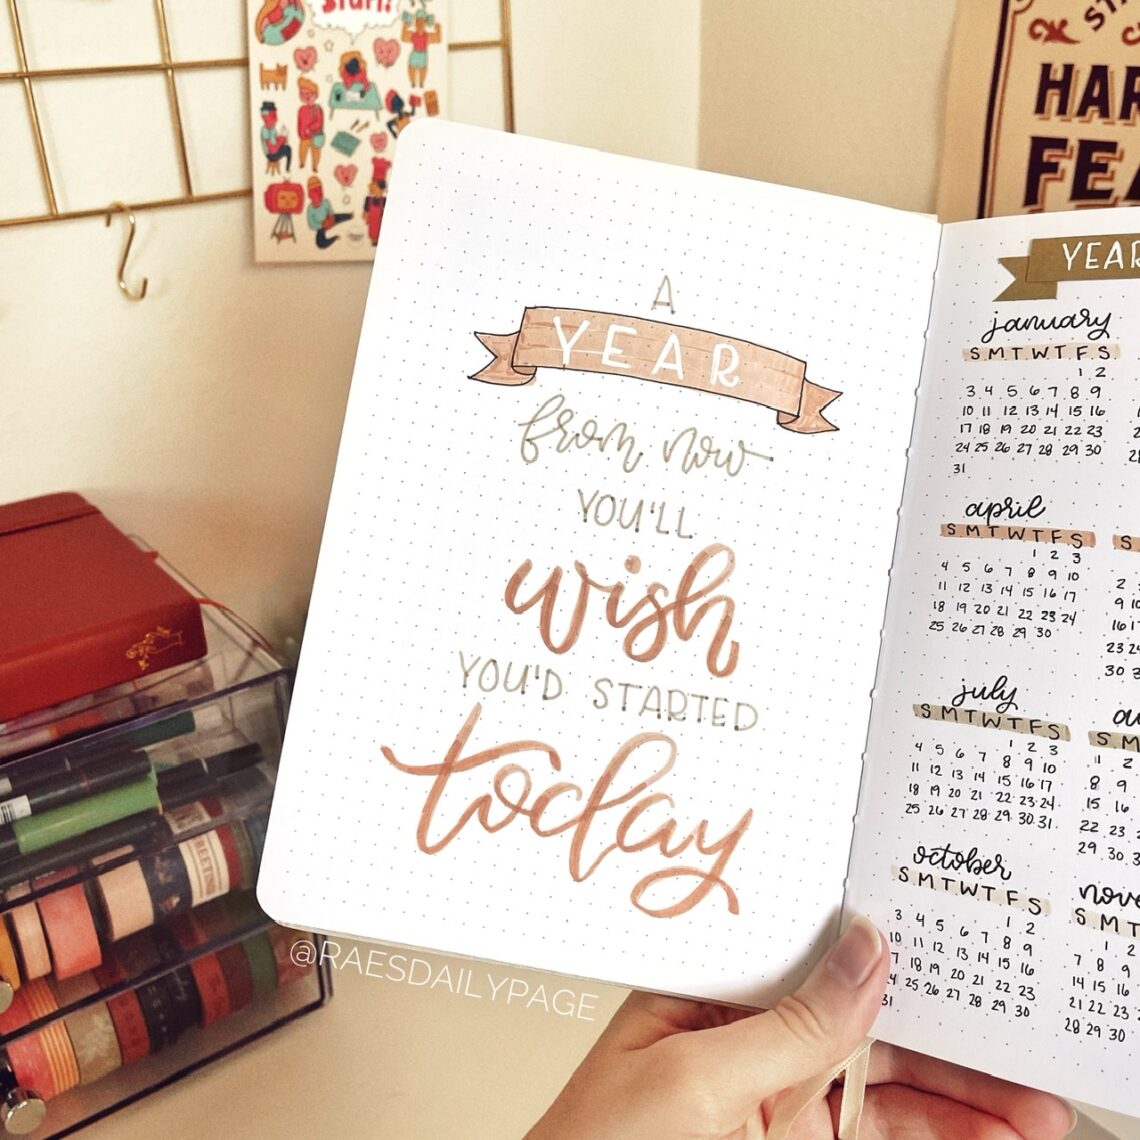 2021 Bullet Journal Set-Up - Rae's Daily Page